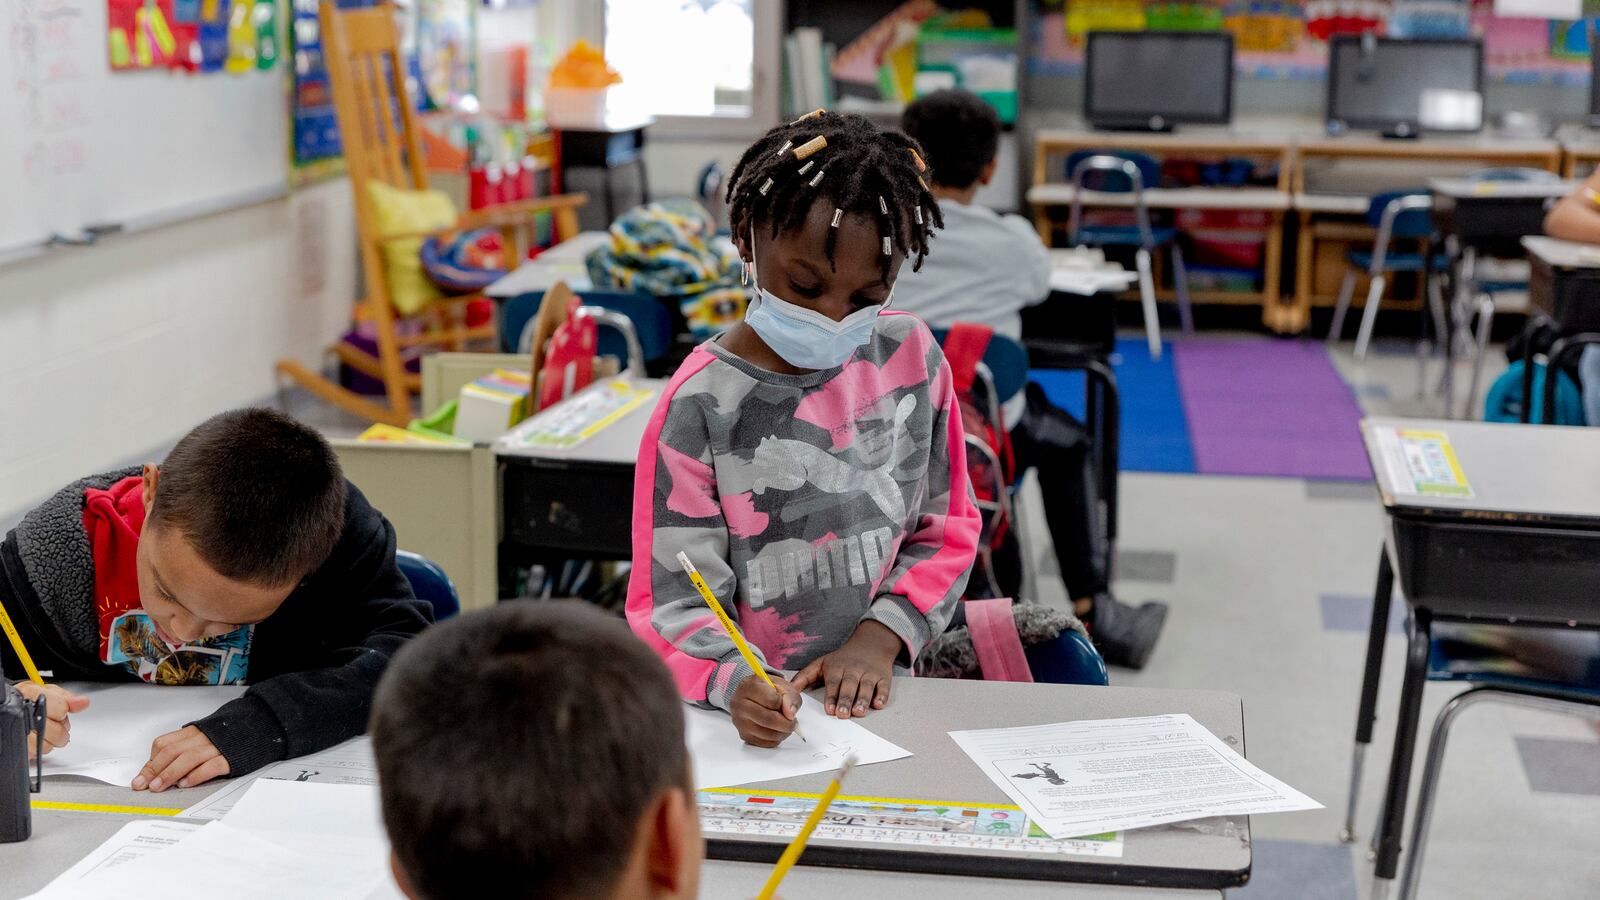 A child with braids and wearing a mask and a pink and gray sweater writes on a piece of paper with a pencil while standing at a desk